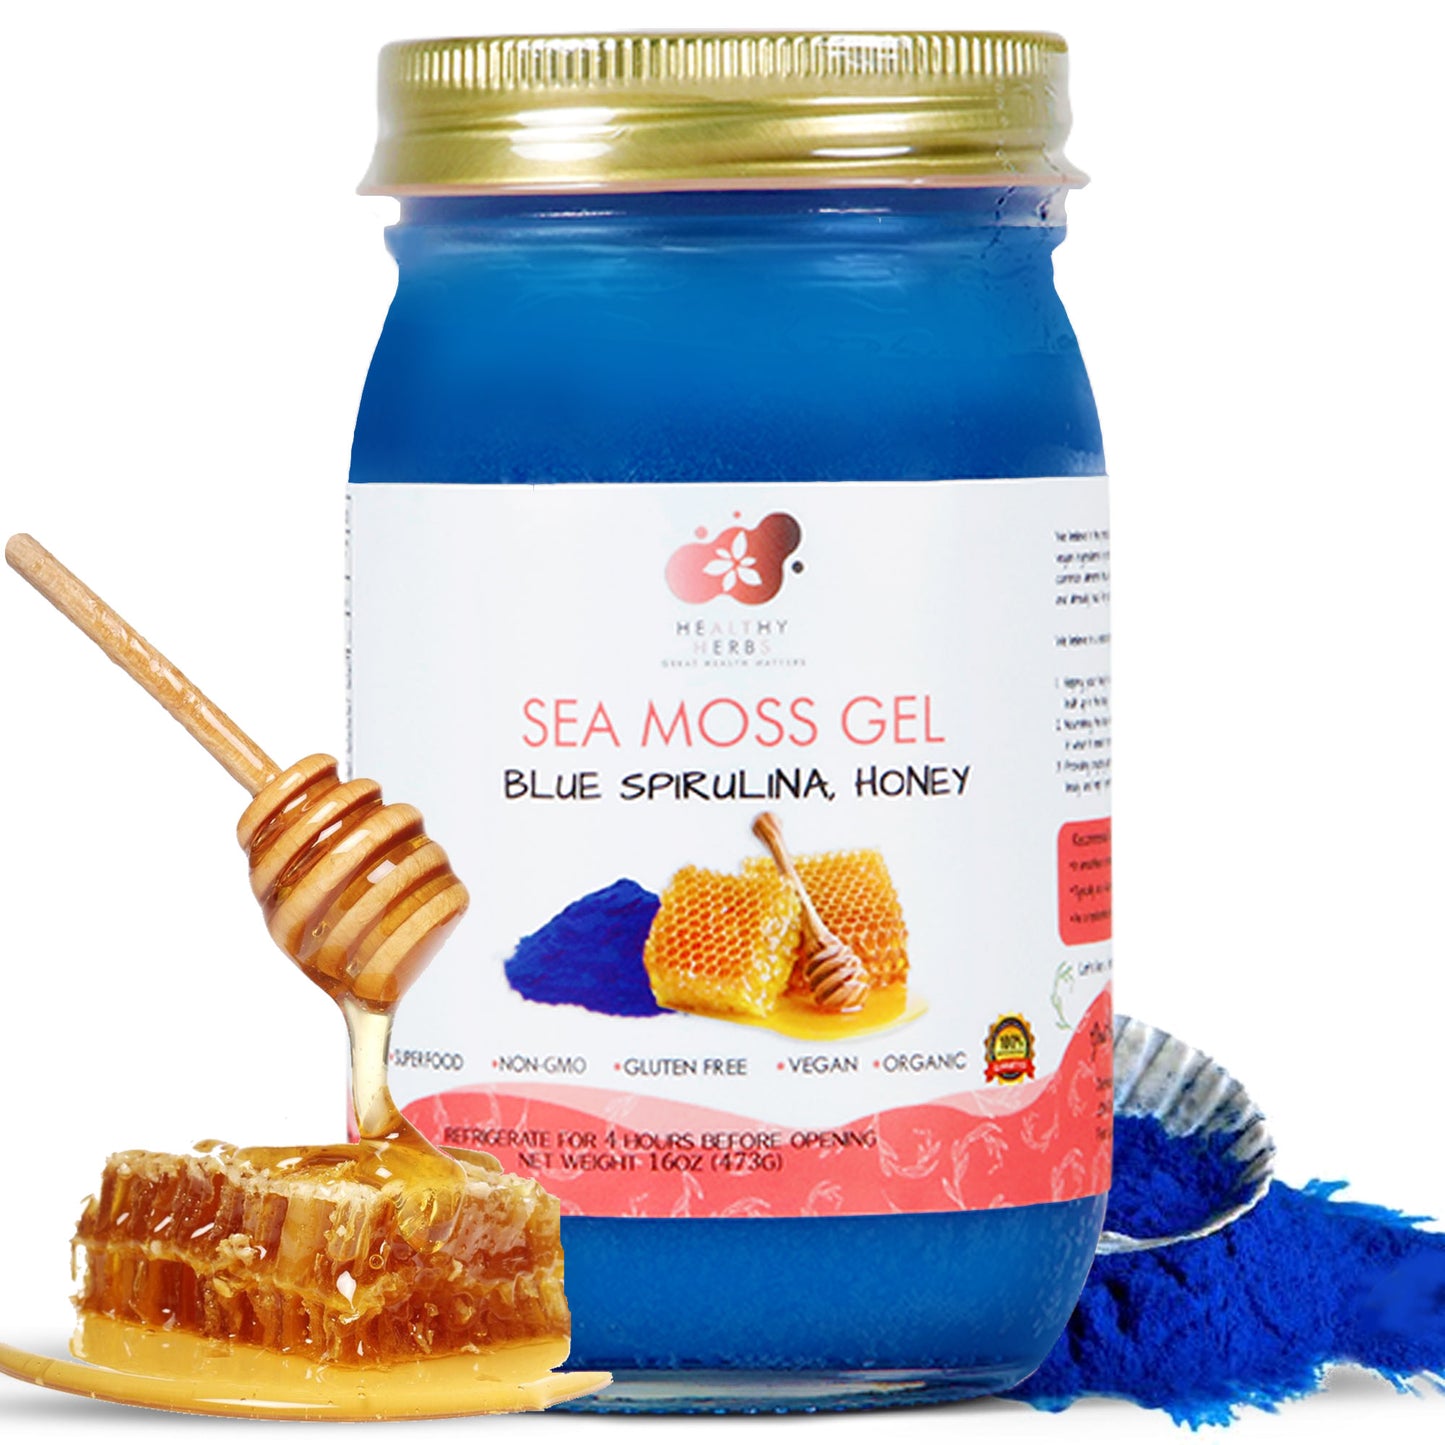 Healthy Herbs sea moss gel, yoni oils, feminine and herb products are made from 100% organic, plant based ingredients, vegan, gluten free, with no additives. Our seamoss gels are made from wildcrafted seamoss along the shorelines of Jamaica and St. Lucia